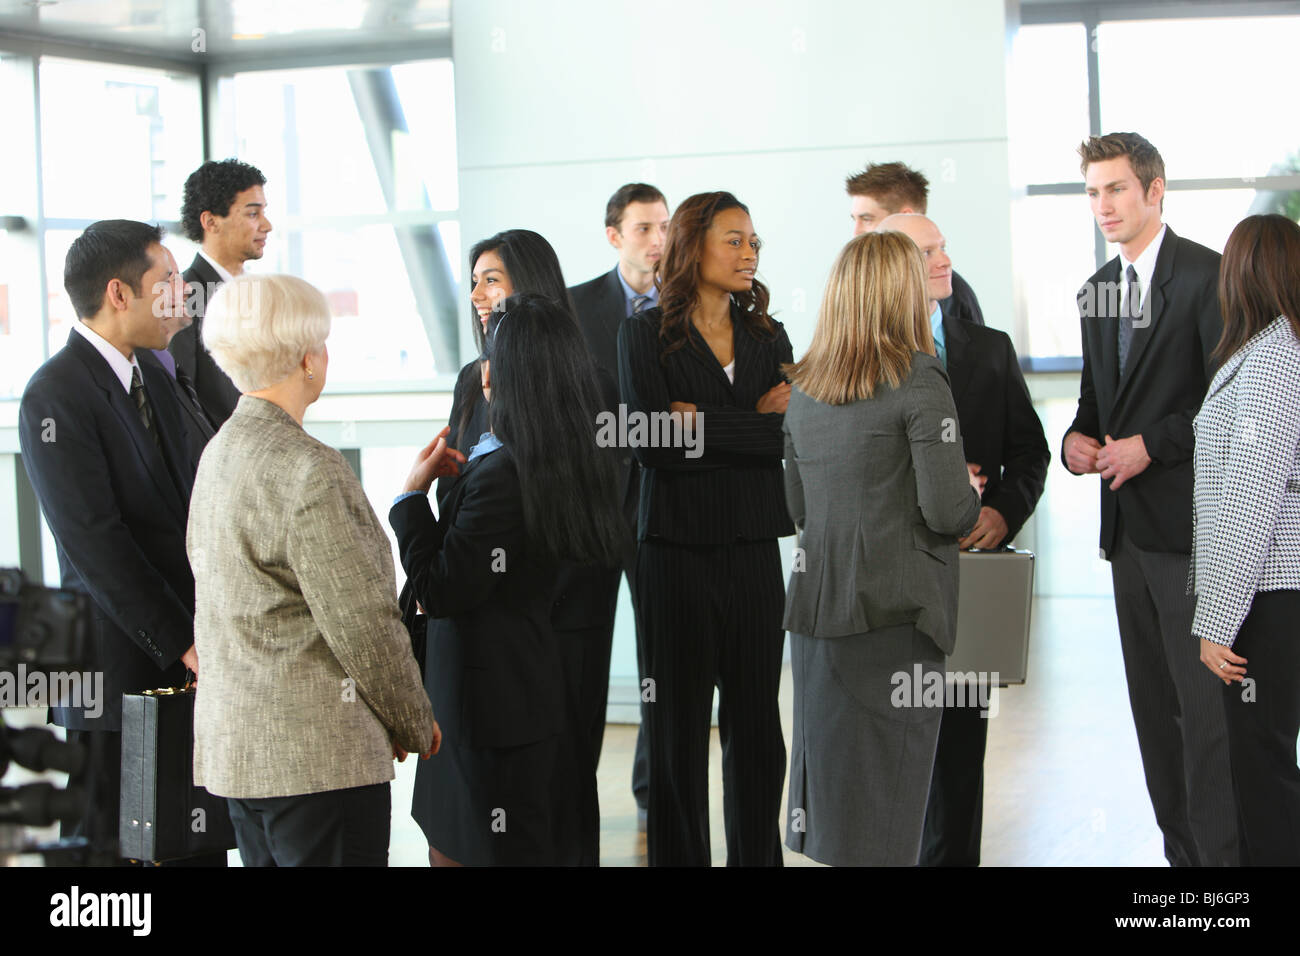 Crowd of businesspeople in lobby Stock Photo